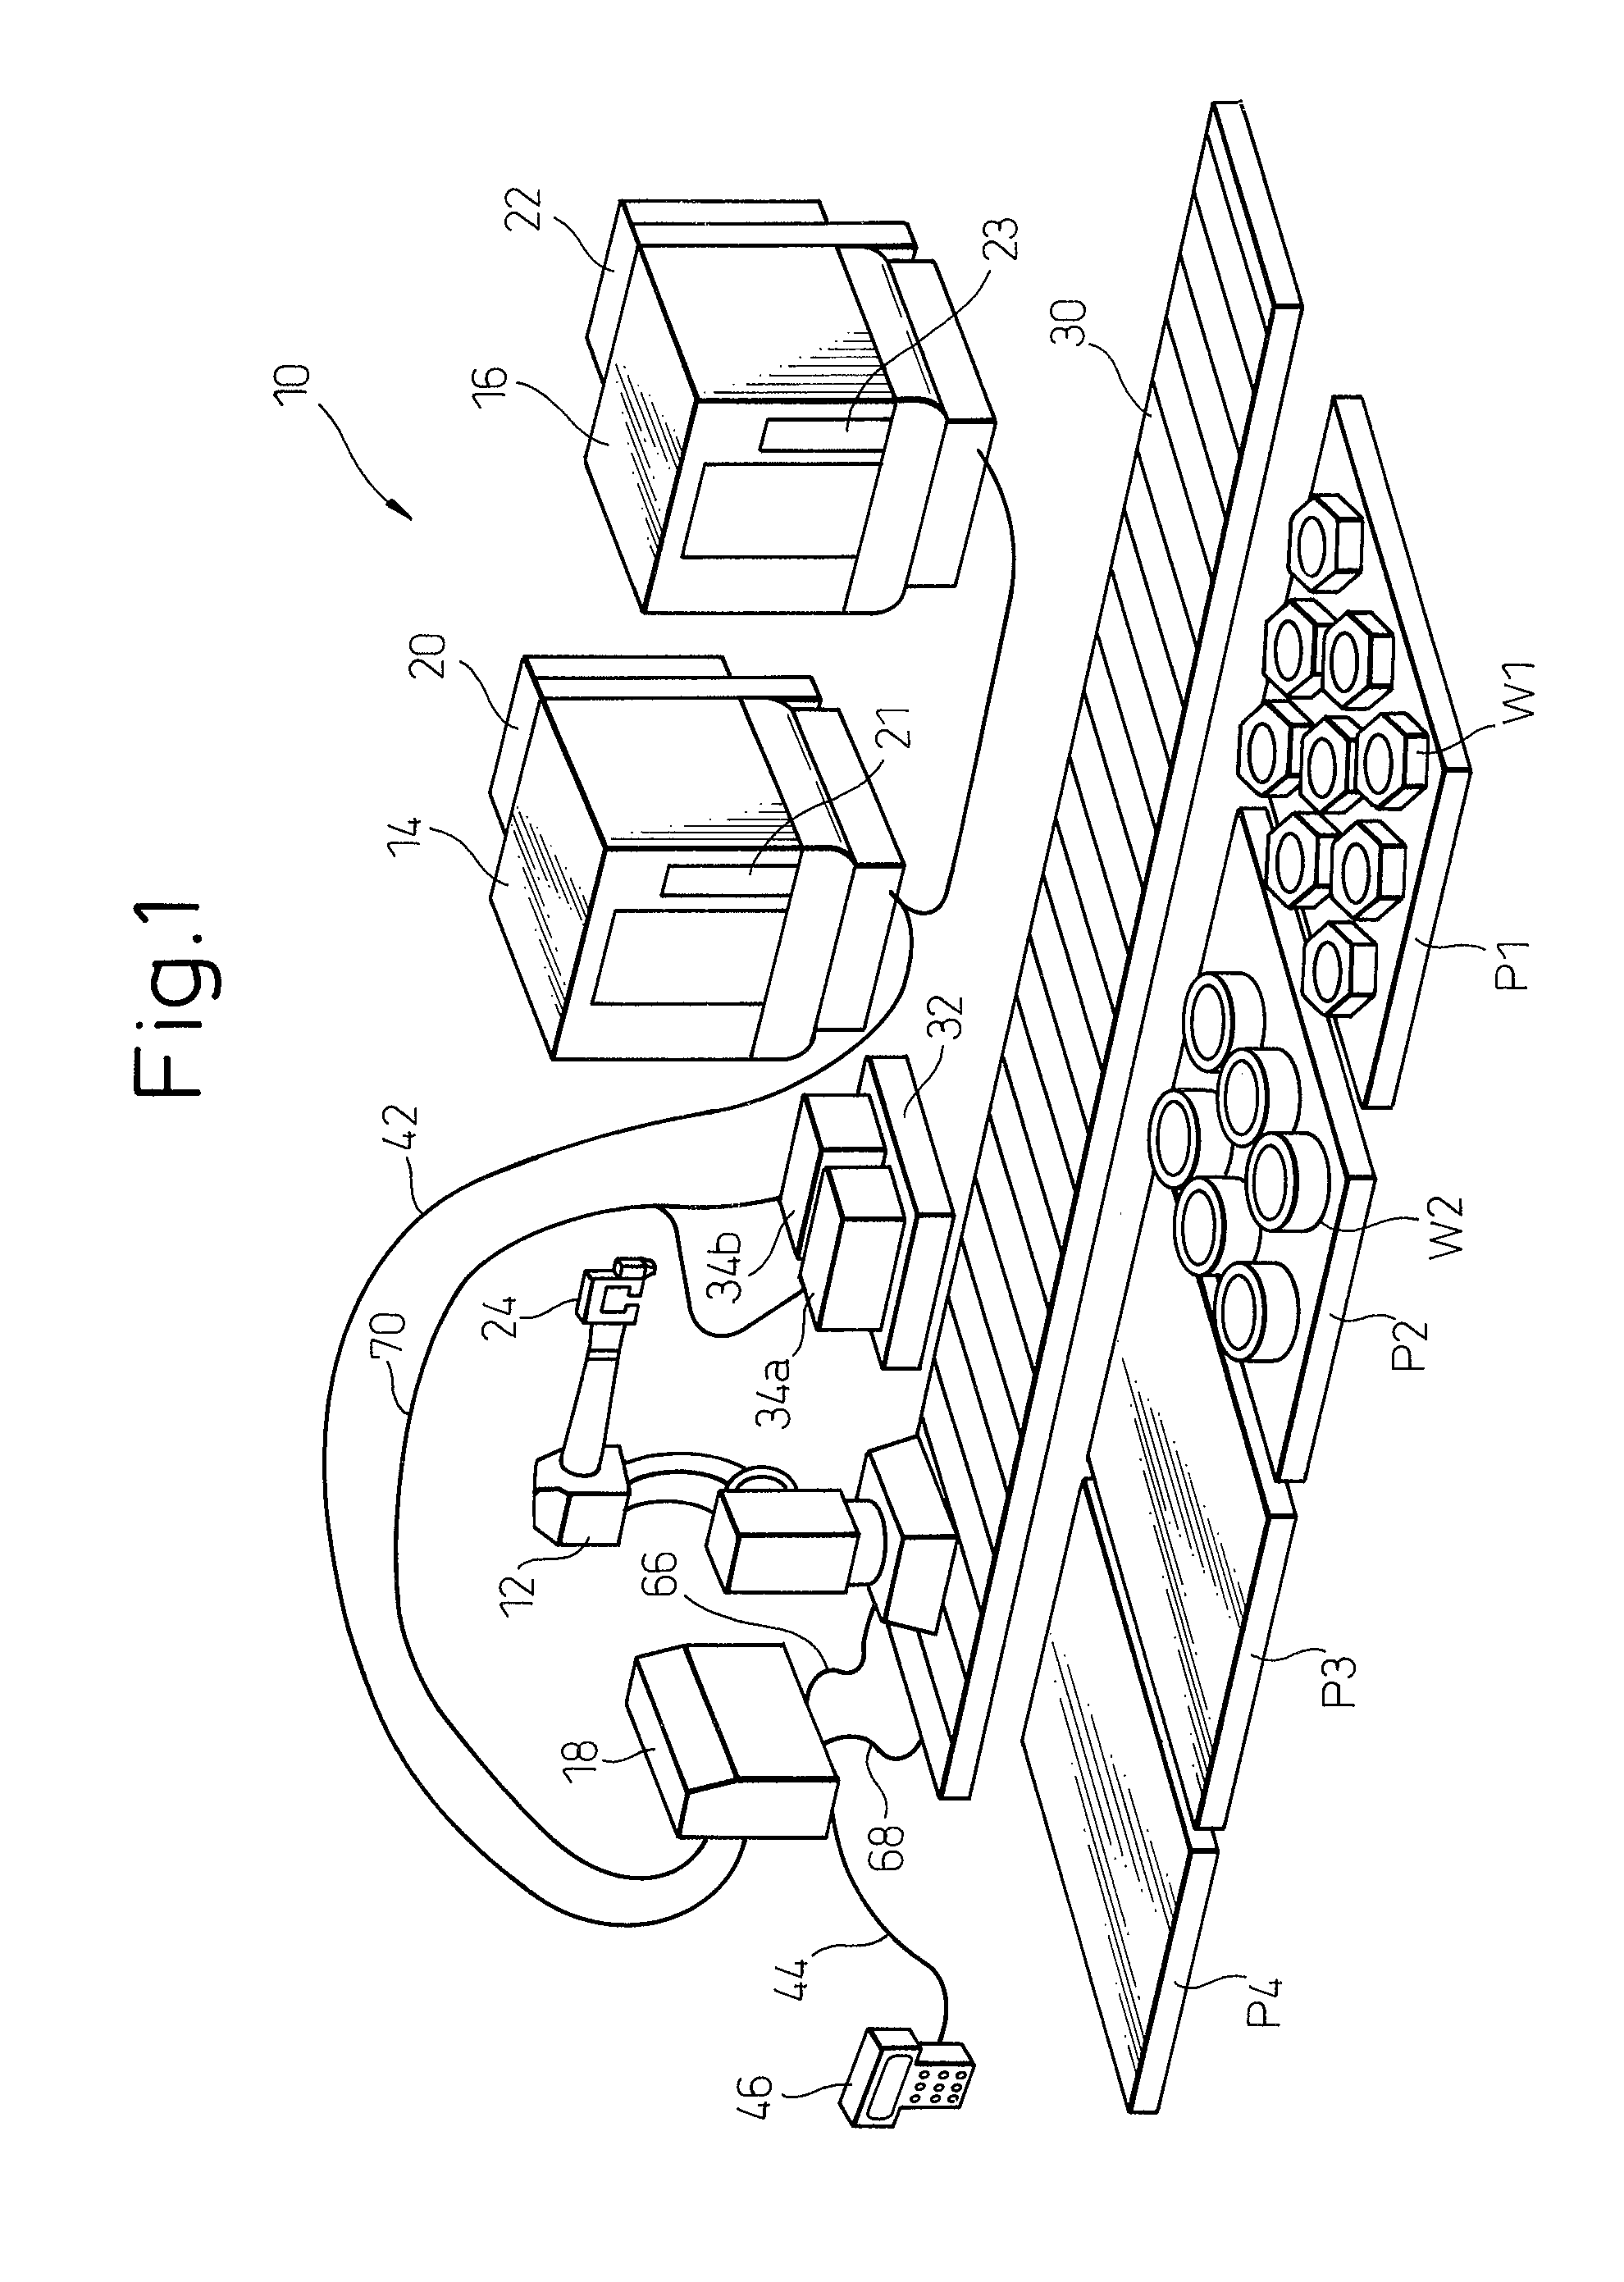 Robot control system provided in machining system including robot and machine tool